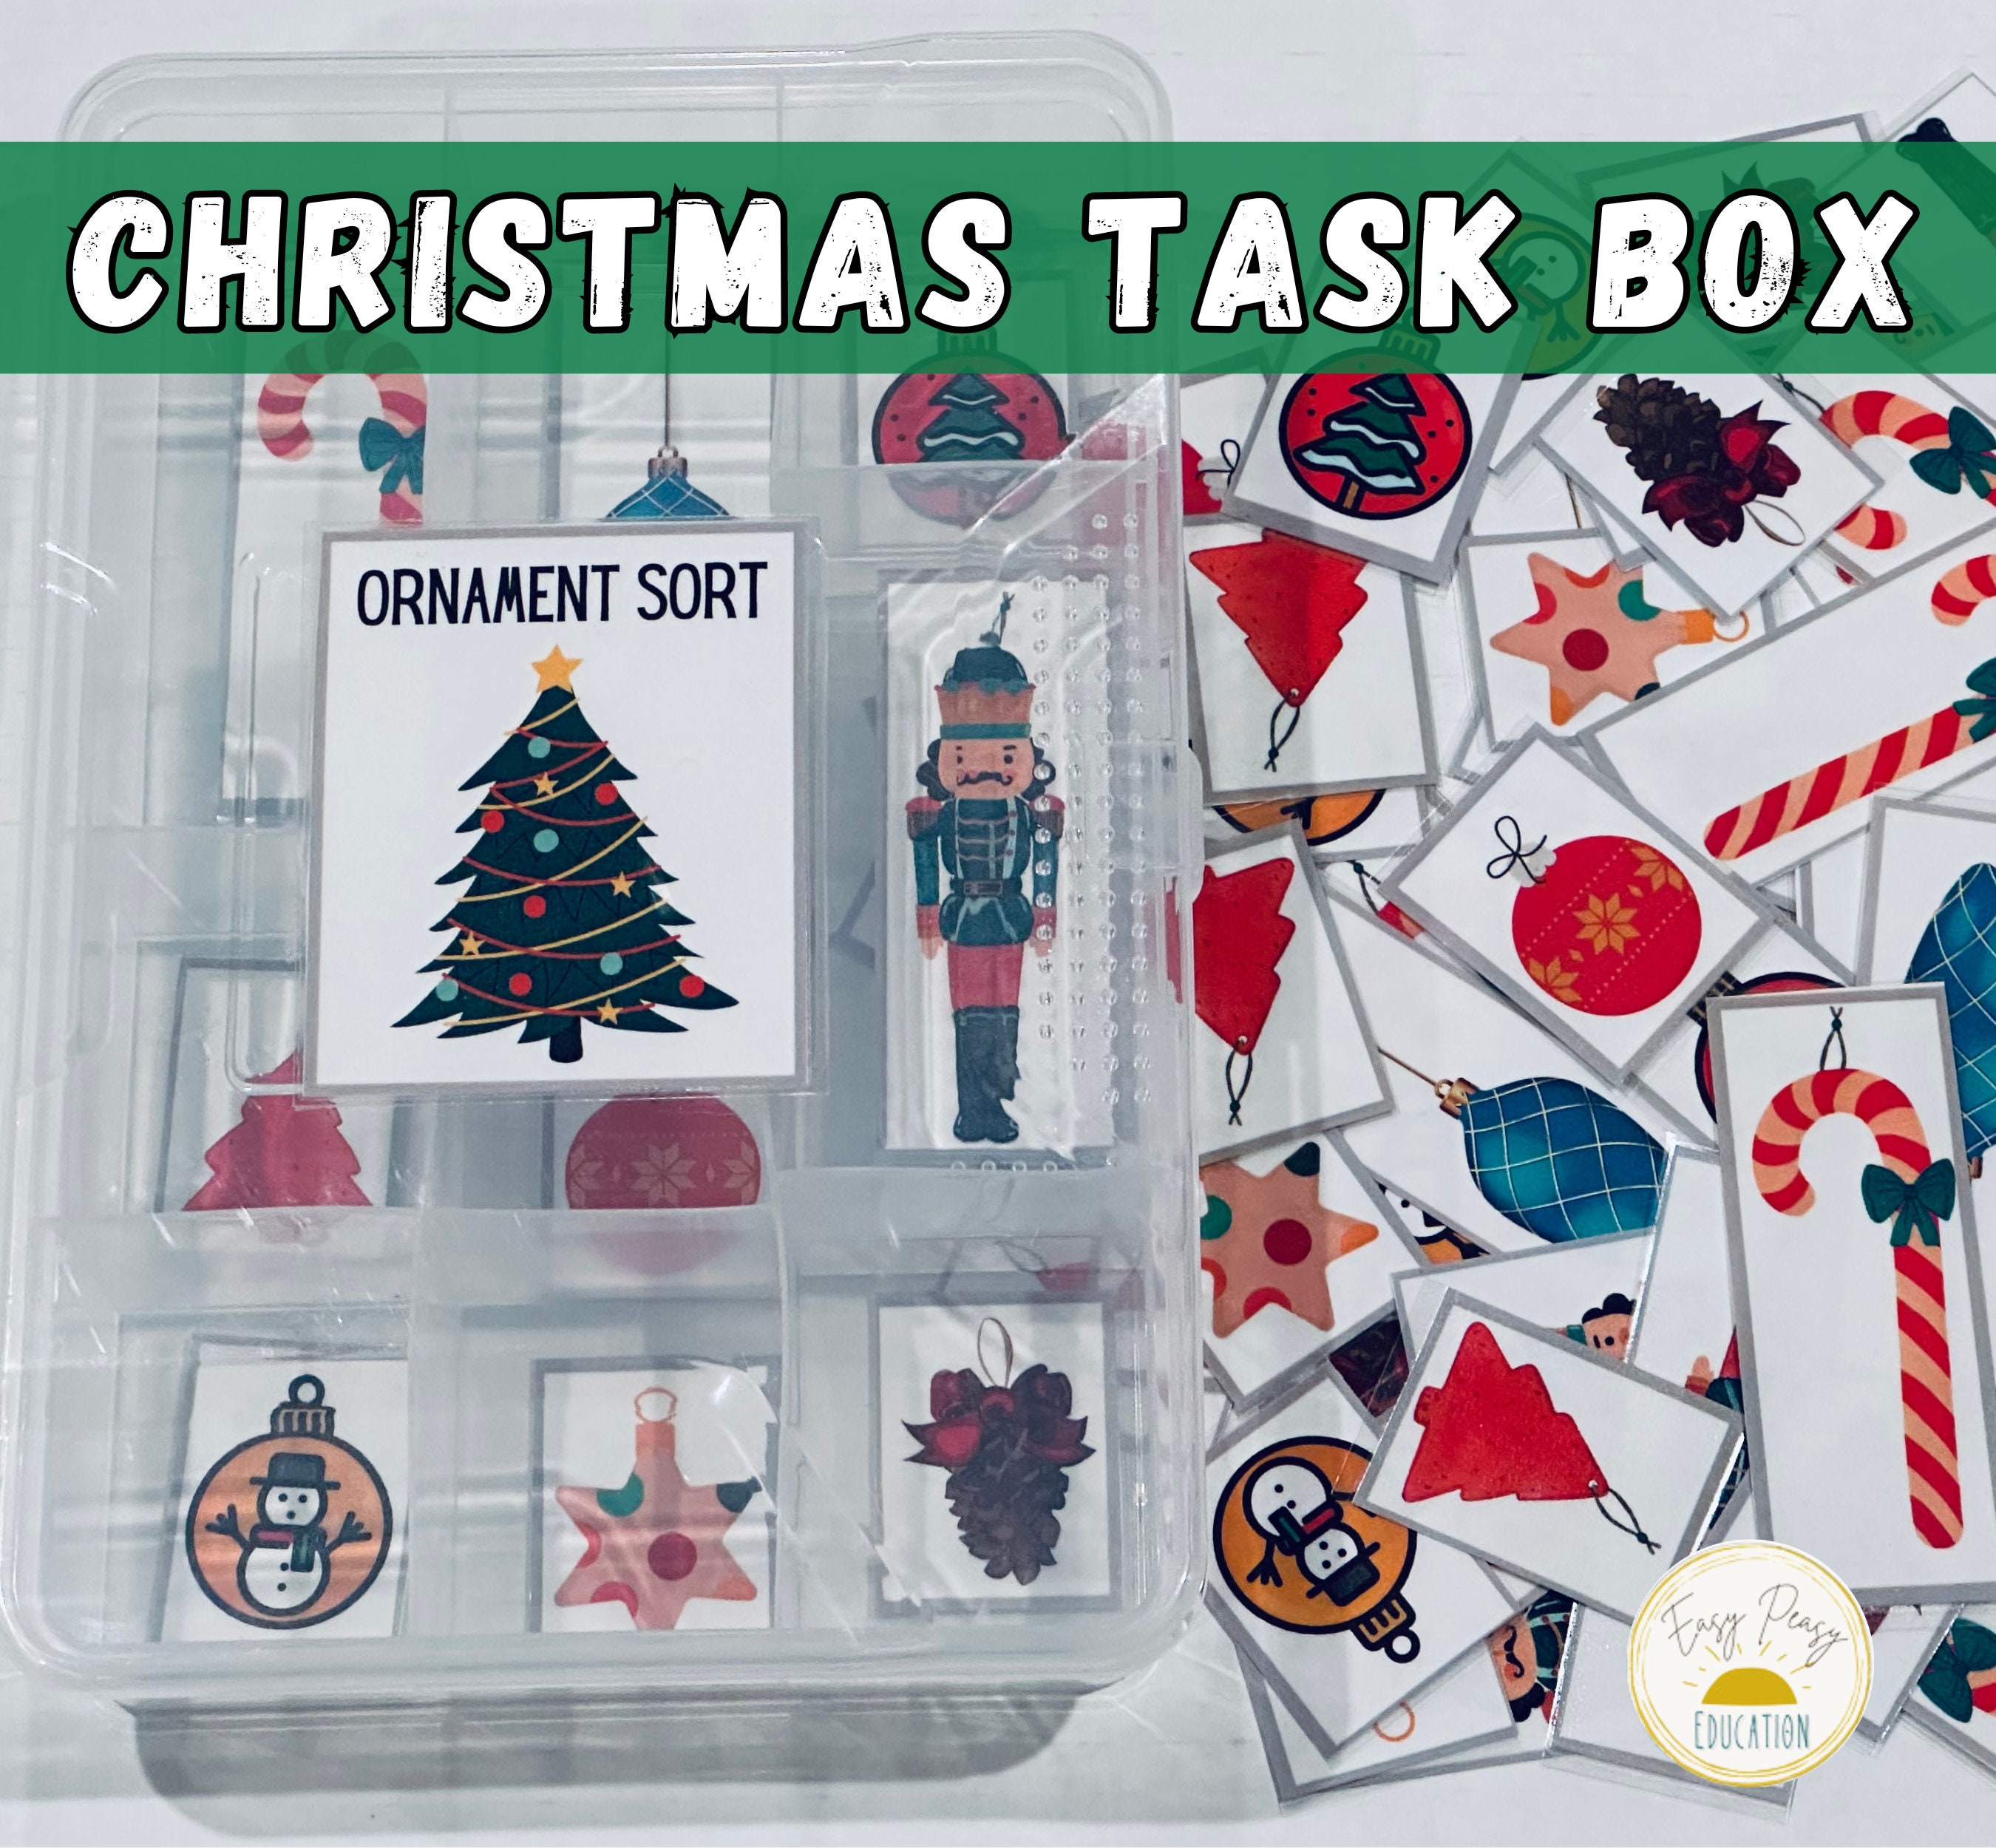 Special Education Task Boxes  Christmas Basic Concepts – Autism Work Tasks